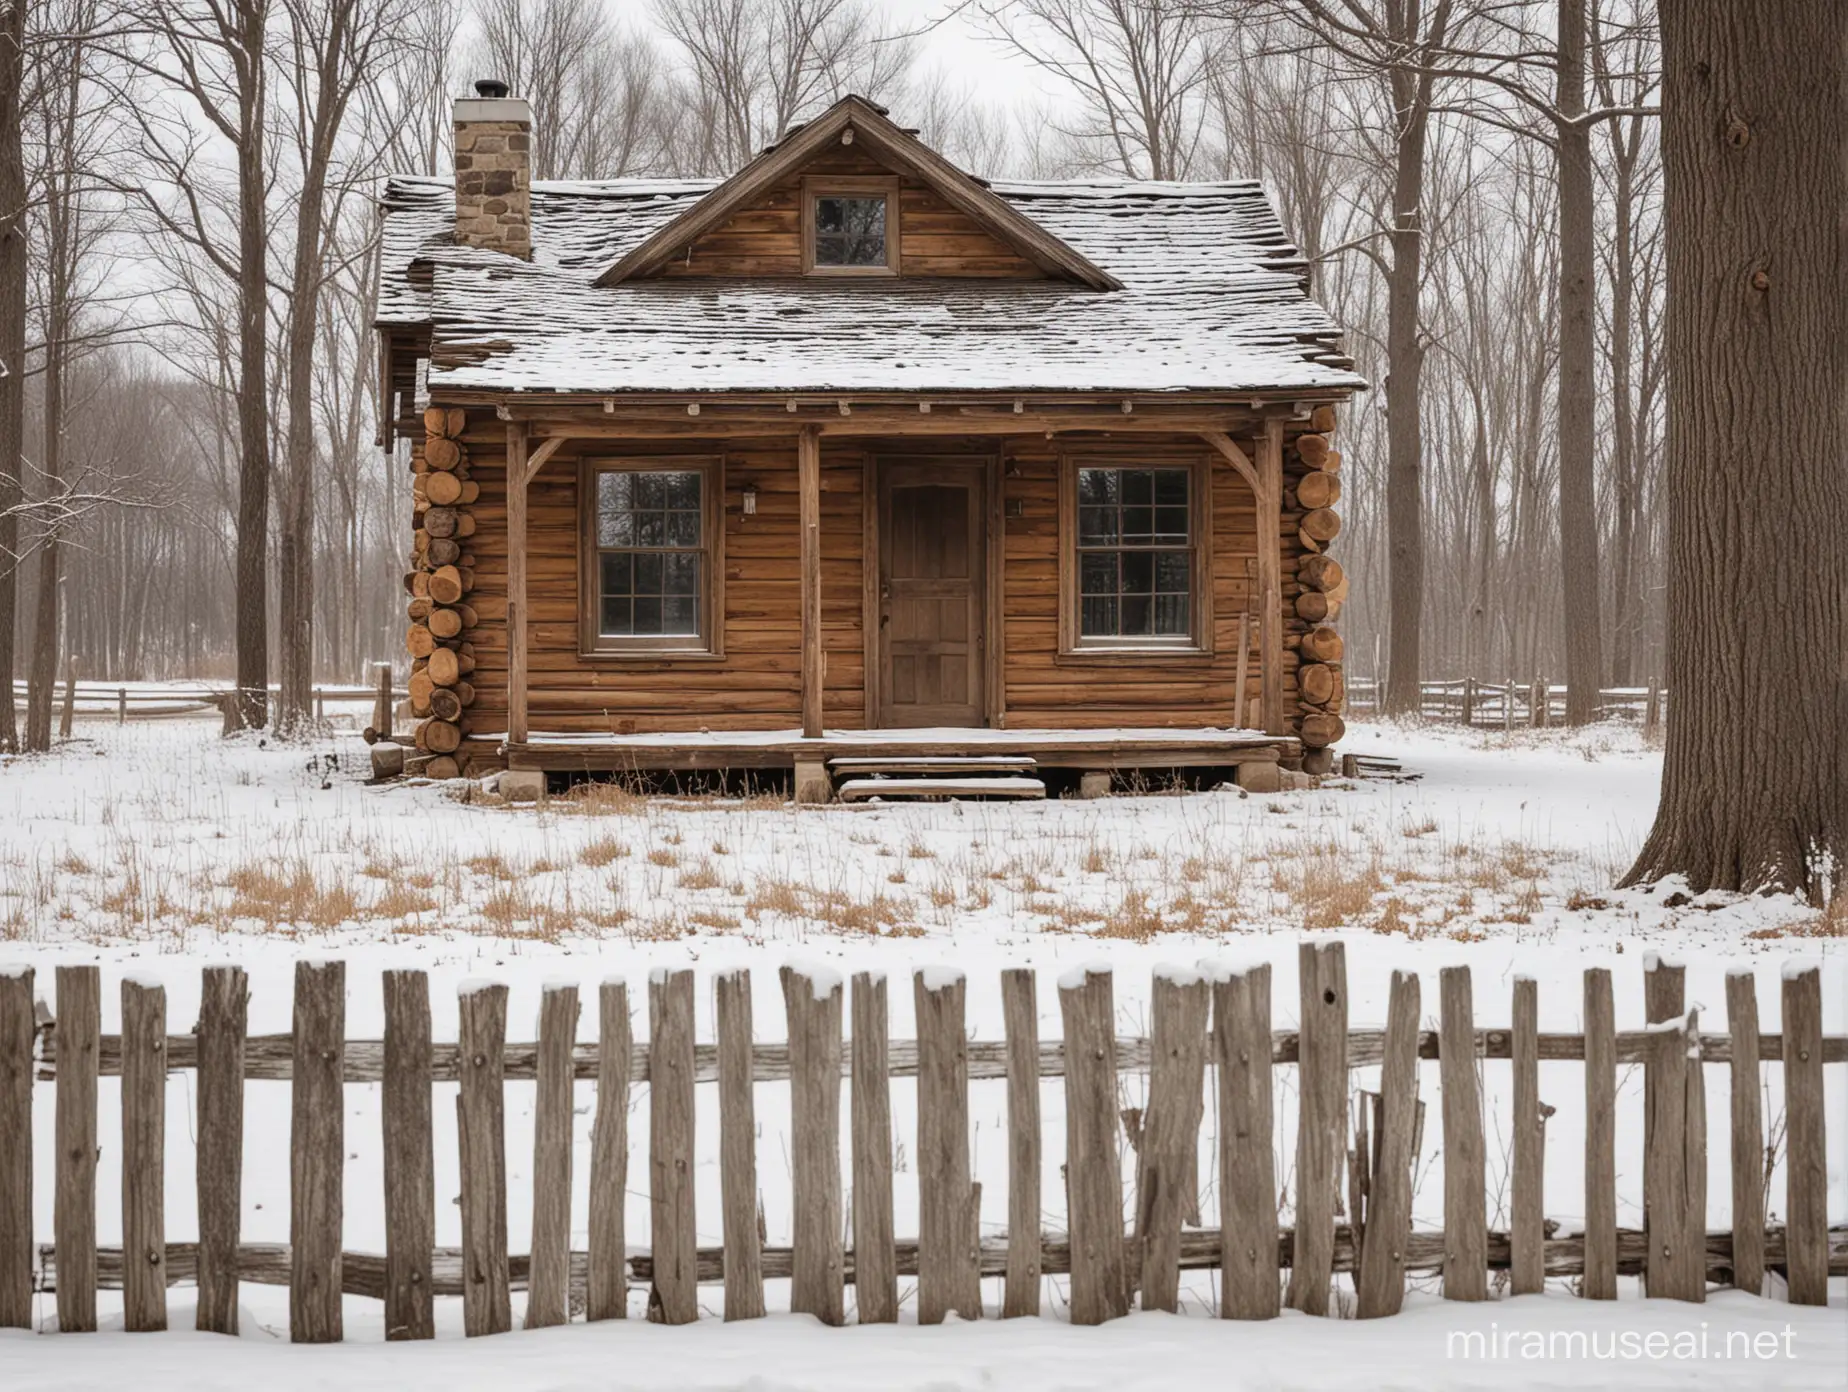 Scenic Winter View of a Rustic Log Cabin and Yard